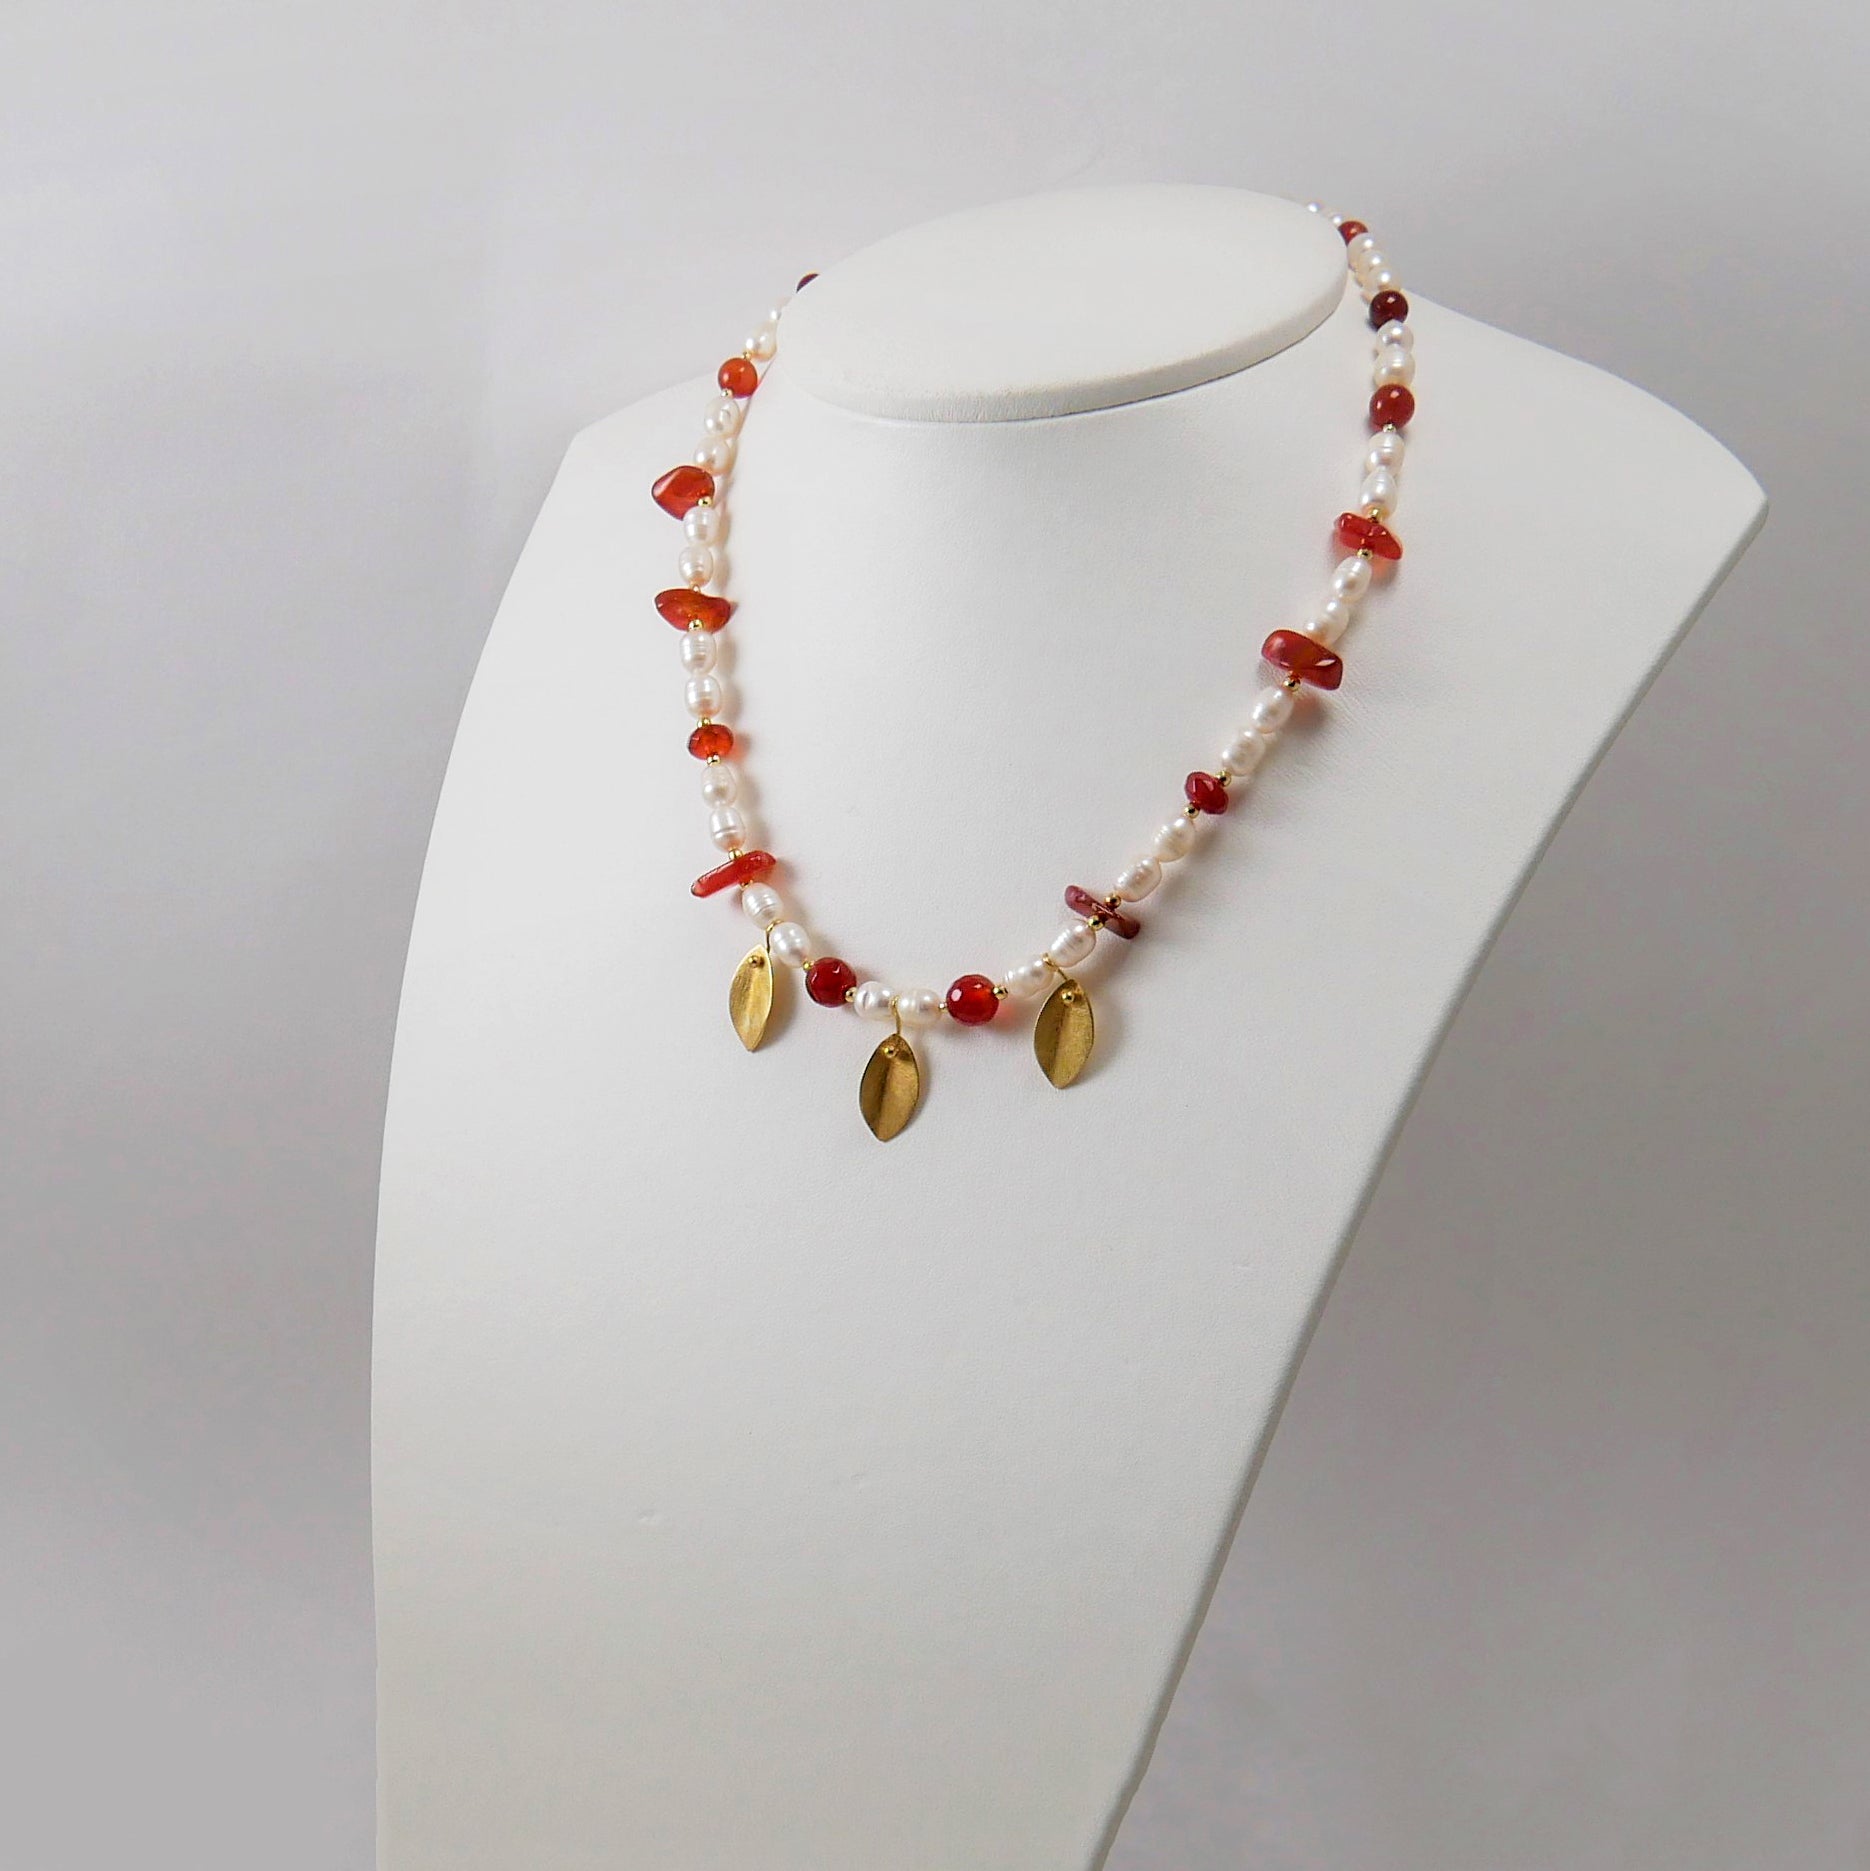 Pearls, Carnelians and Gold Plated Sterling Silver Leaves Necklace - Katerina Roukouna